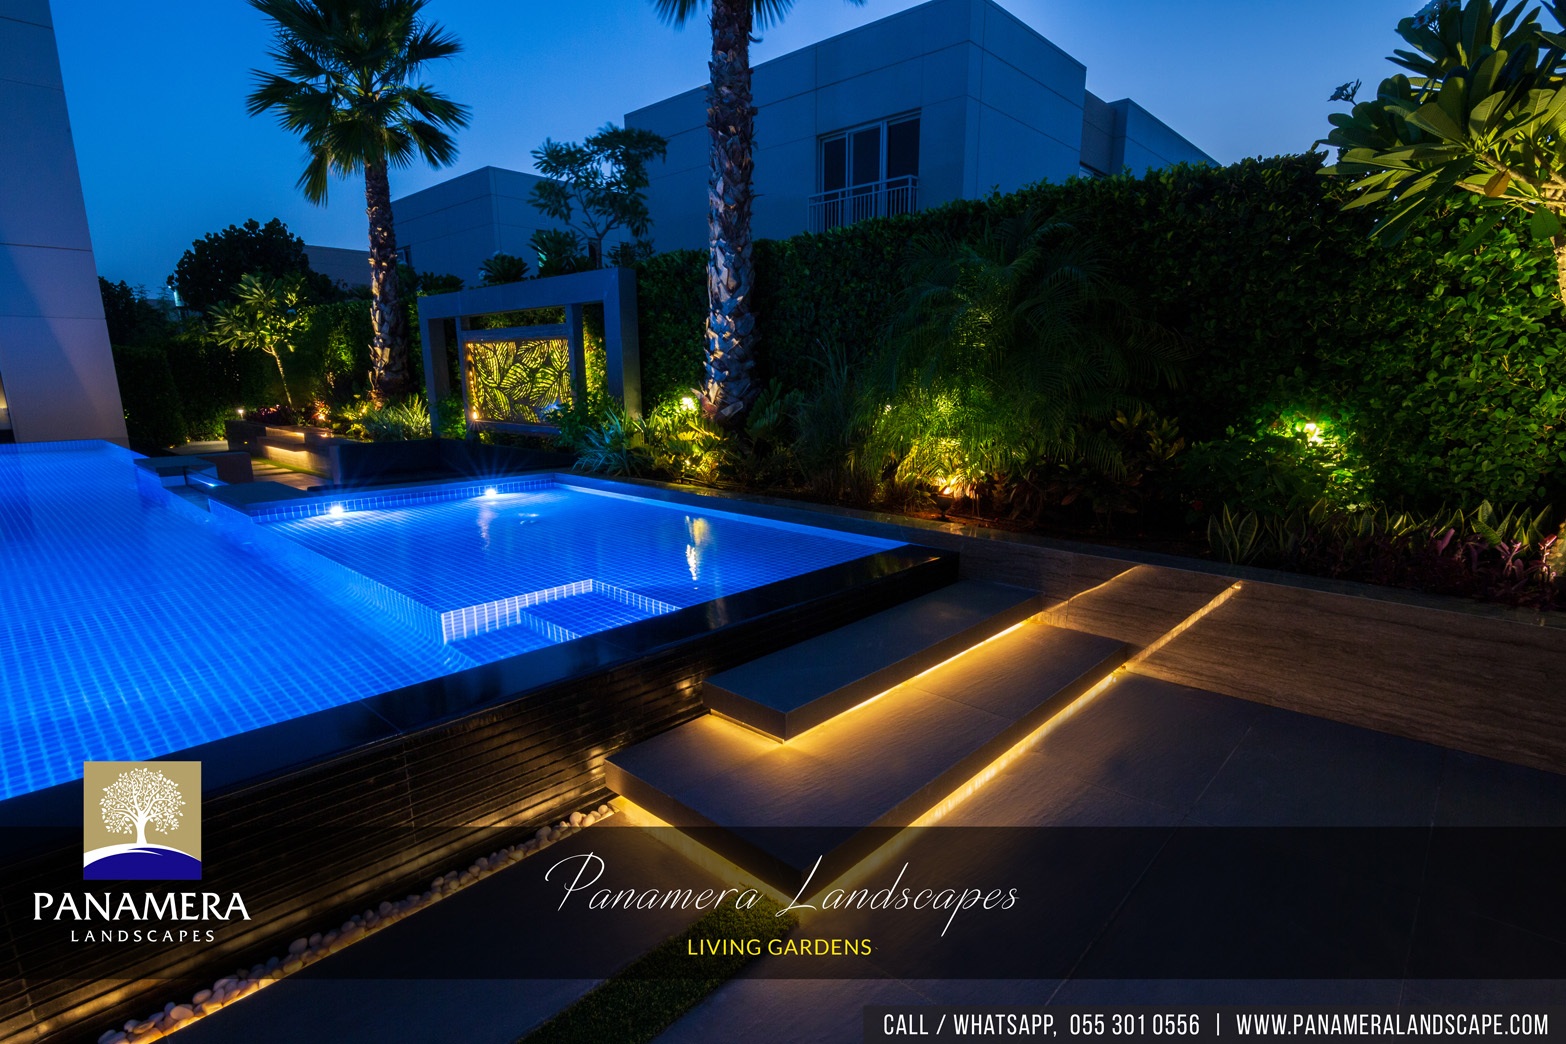 Best Landscaping Companies In Dubai, Pool And Landscaping Companies